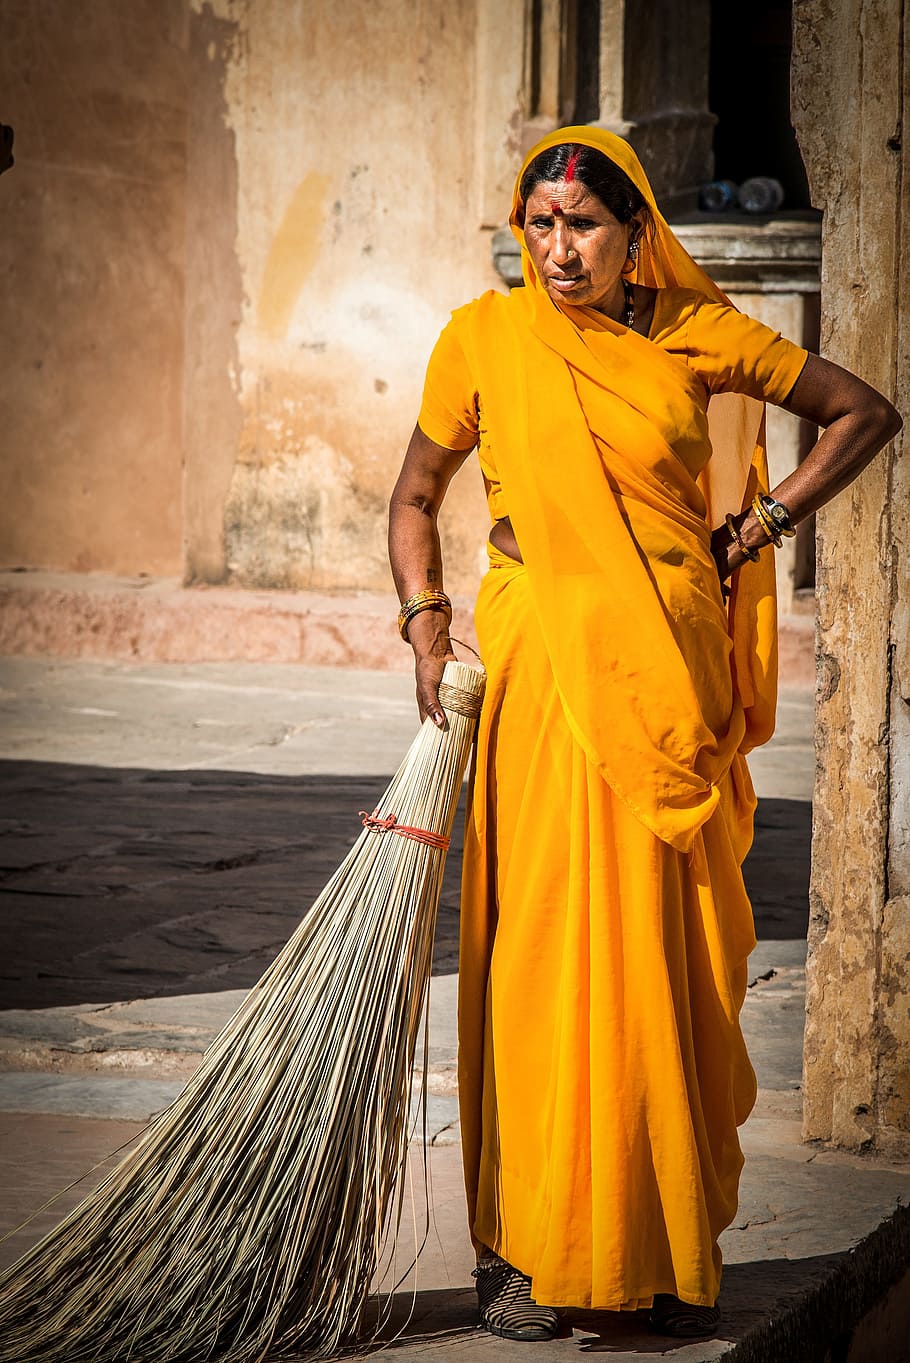 woman in yellow sari dress holding broomstick, indian woman, person